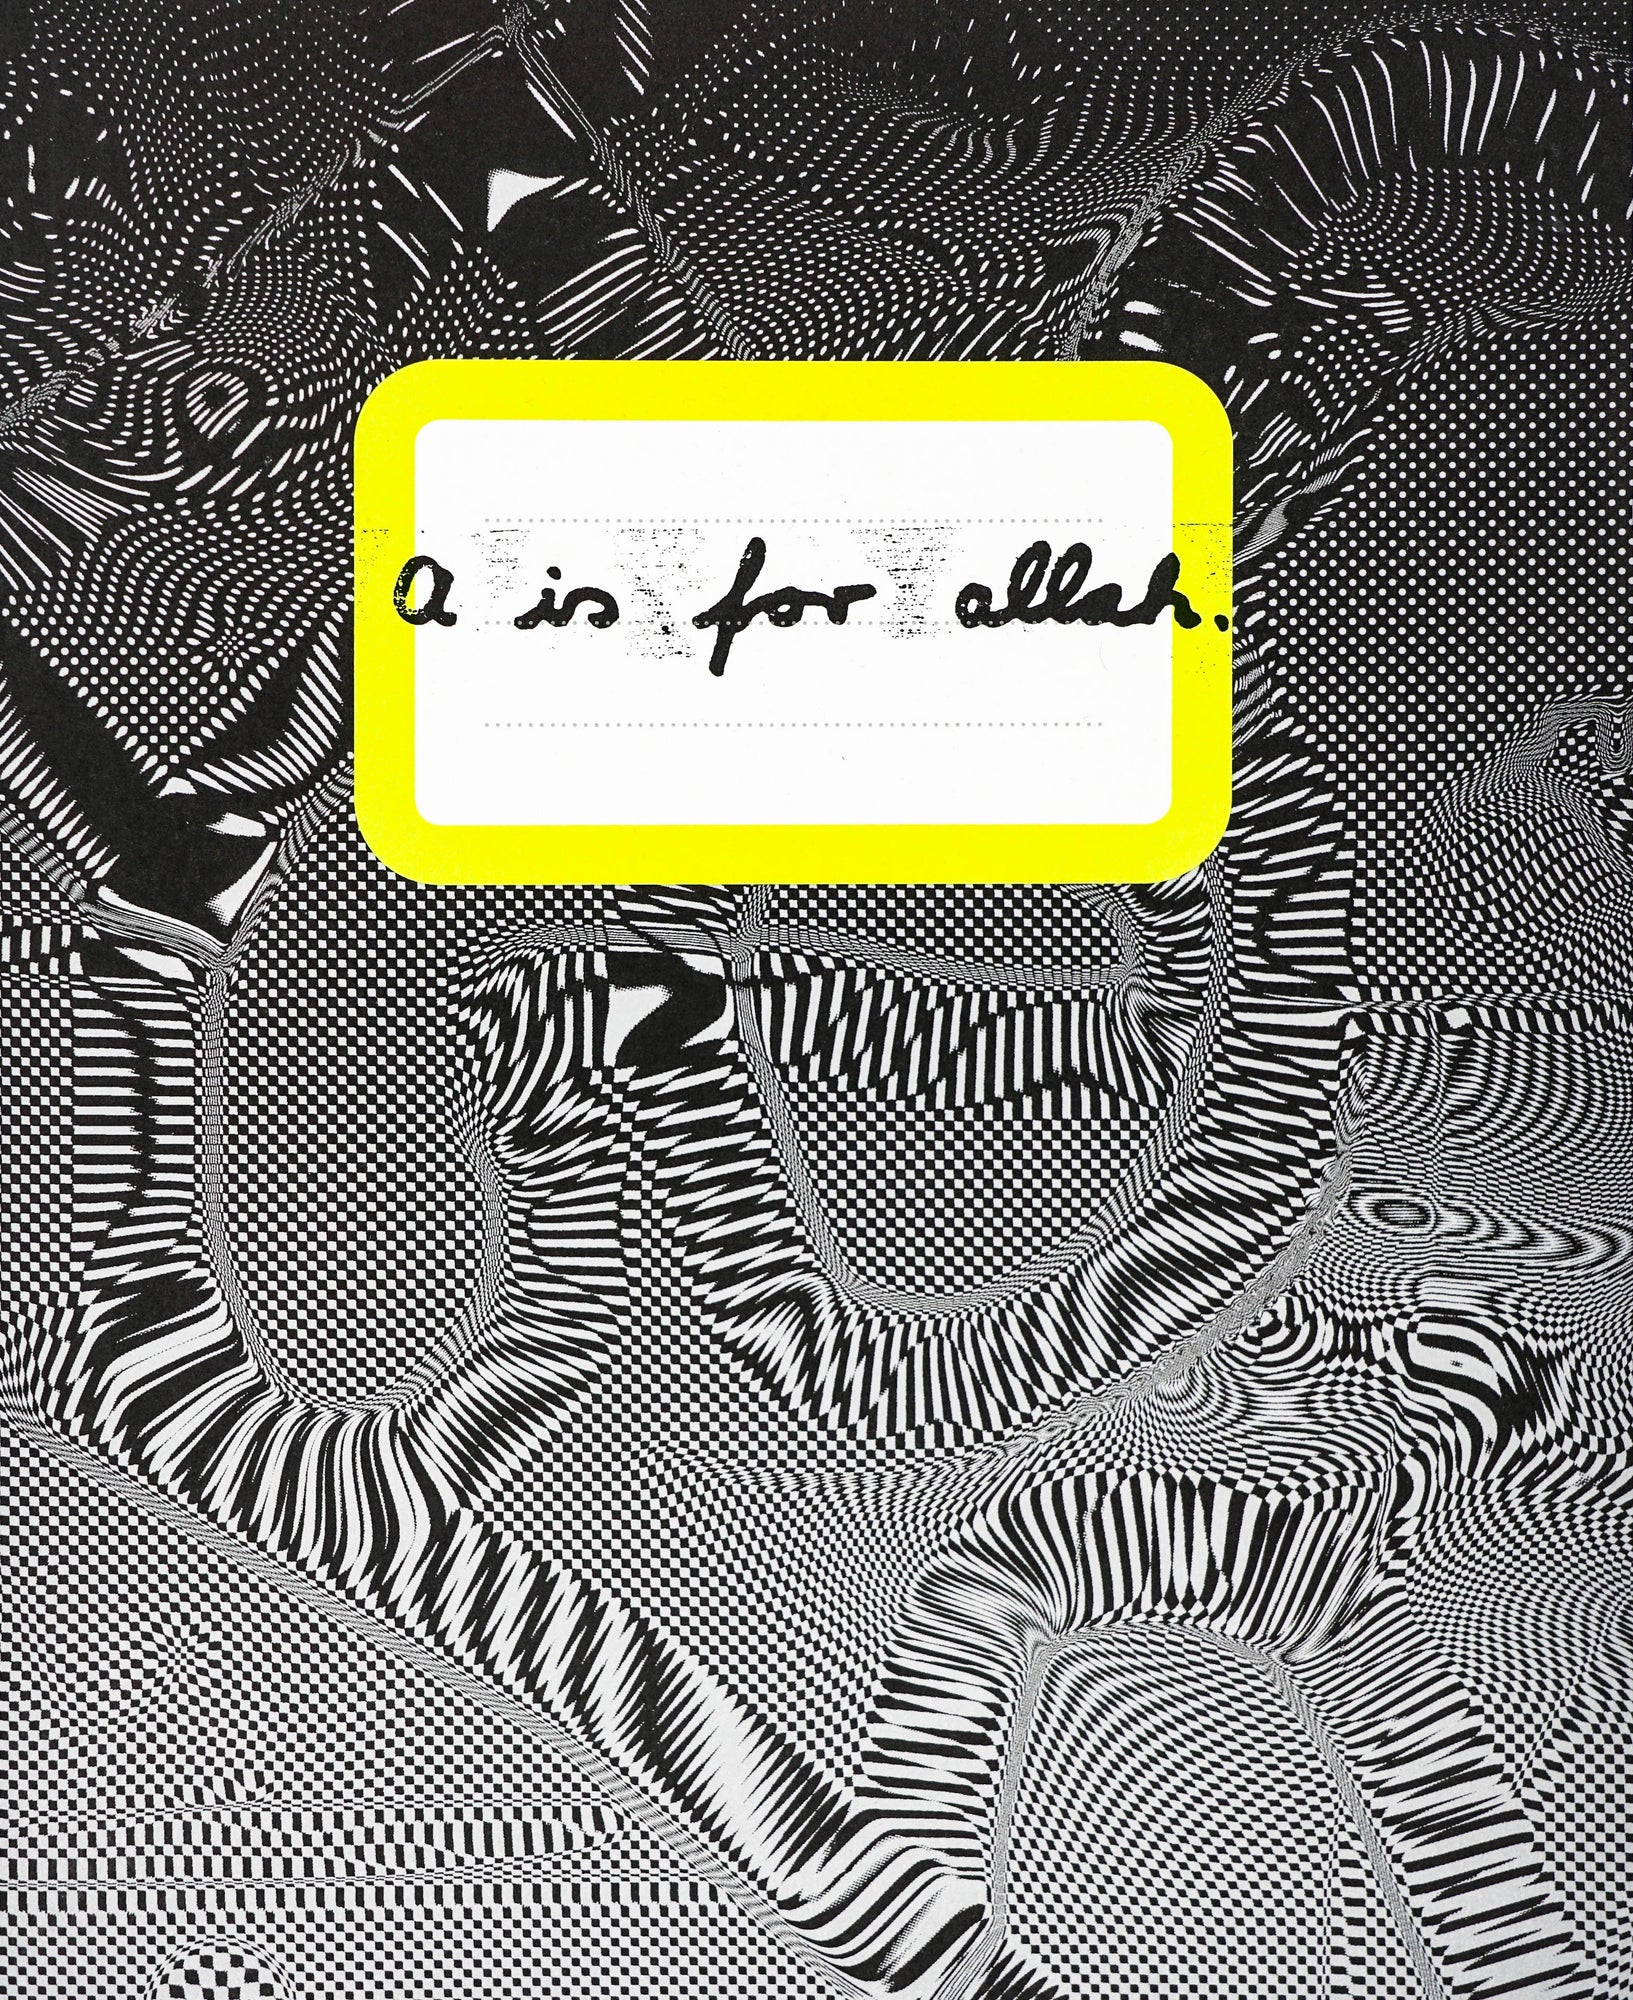 Book cover with abstract psychedelic black and white ornamental pattern. A white rectangle with yellow outlines is positioned on the page and has the hand written title “a is for allah“ written in it. 